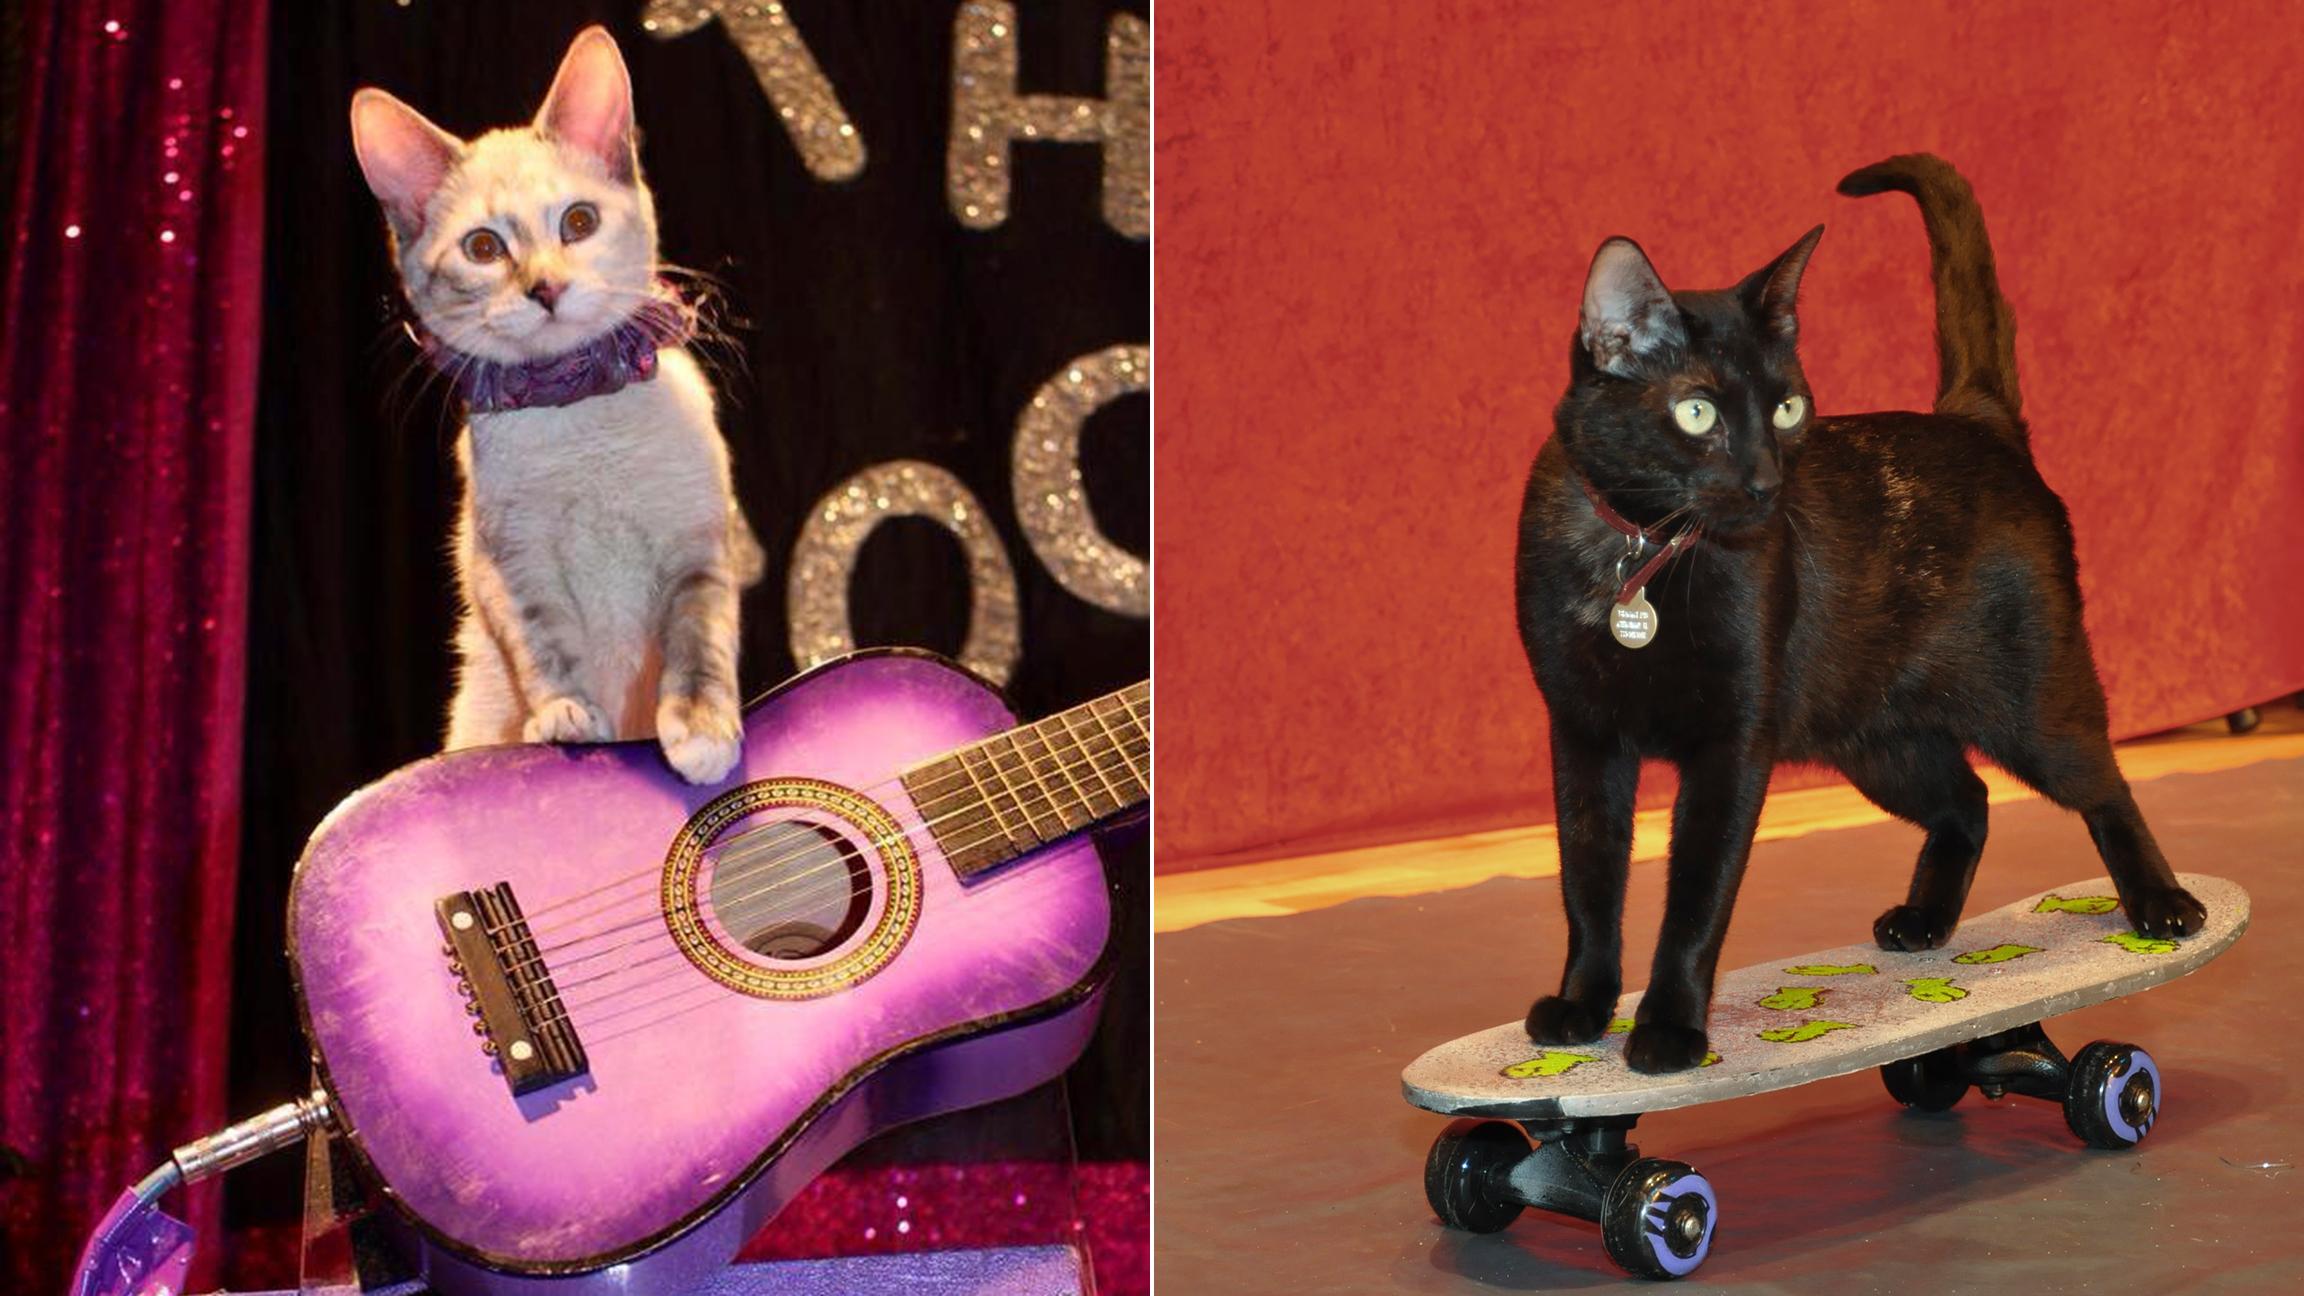 Rock ‘n’ roll: Cats can do a lot more than sleep. See feline feats at the Amazing Acro-Cats show. (Courtesy Samantha Martin)